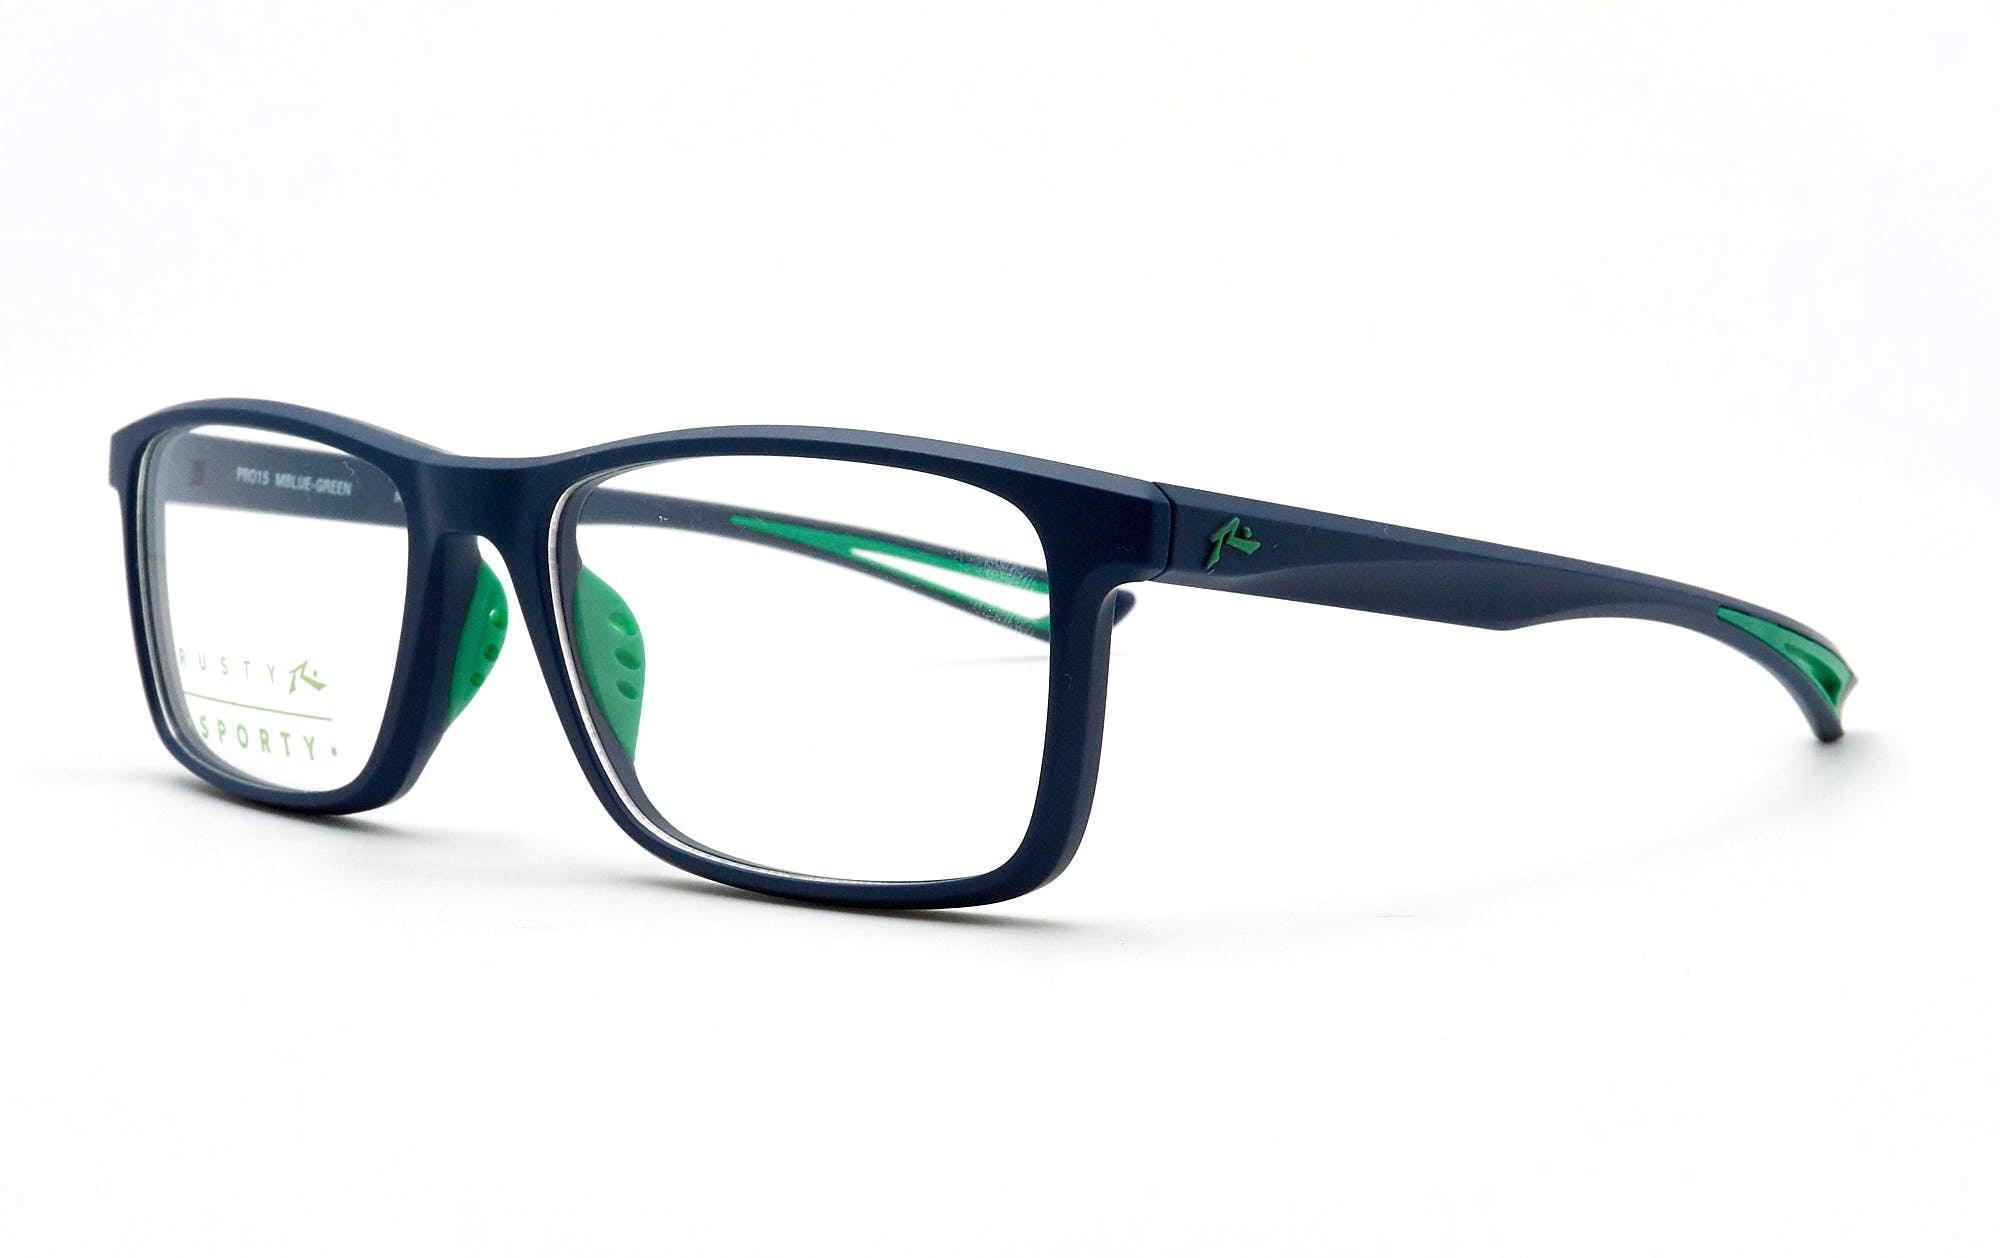 RUSTY PRO15 MBLUE GREEN - Opticas Lookout